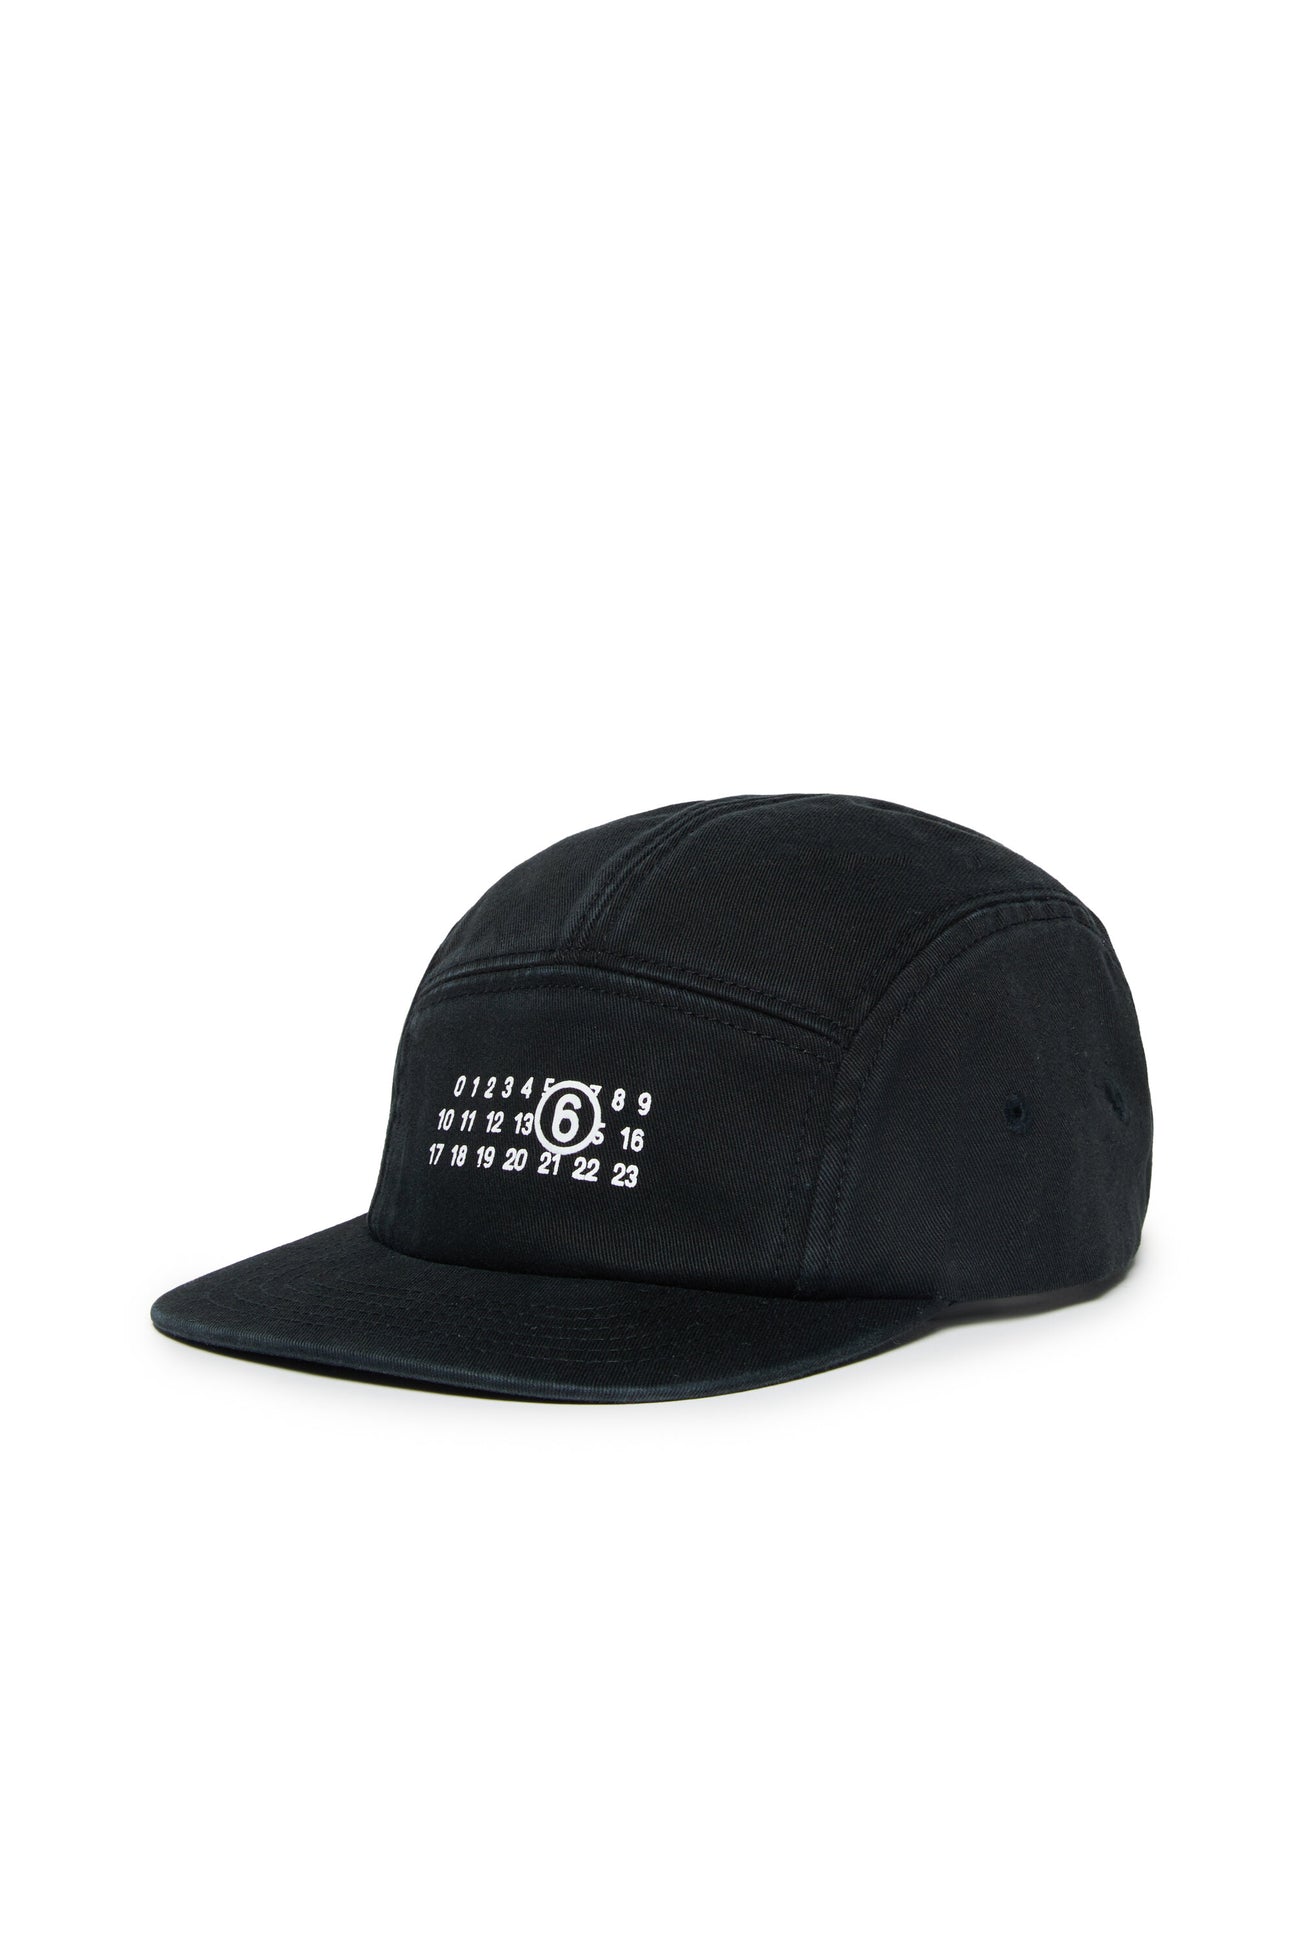 Five-panel hat branded with numeric logo 